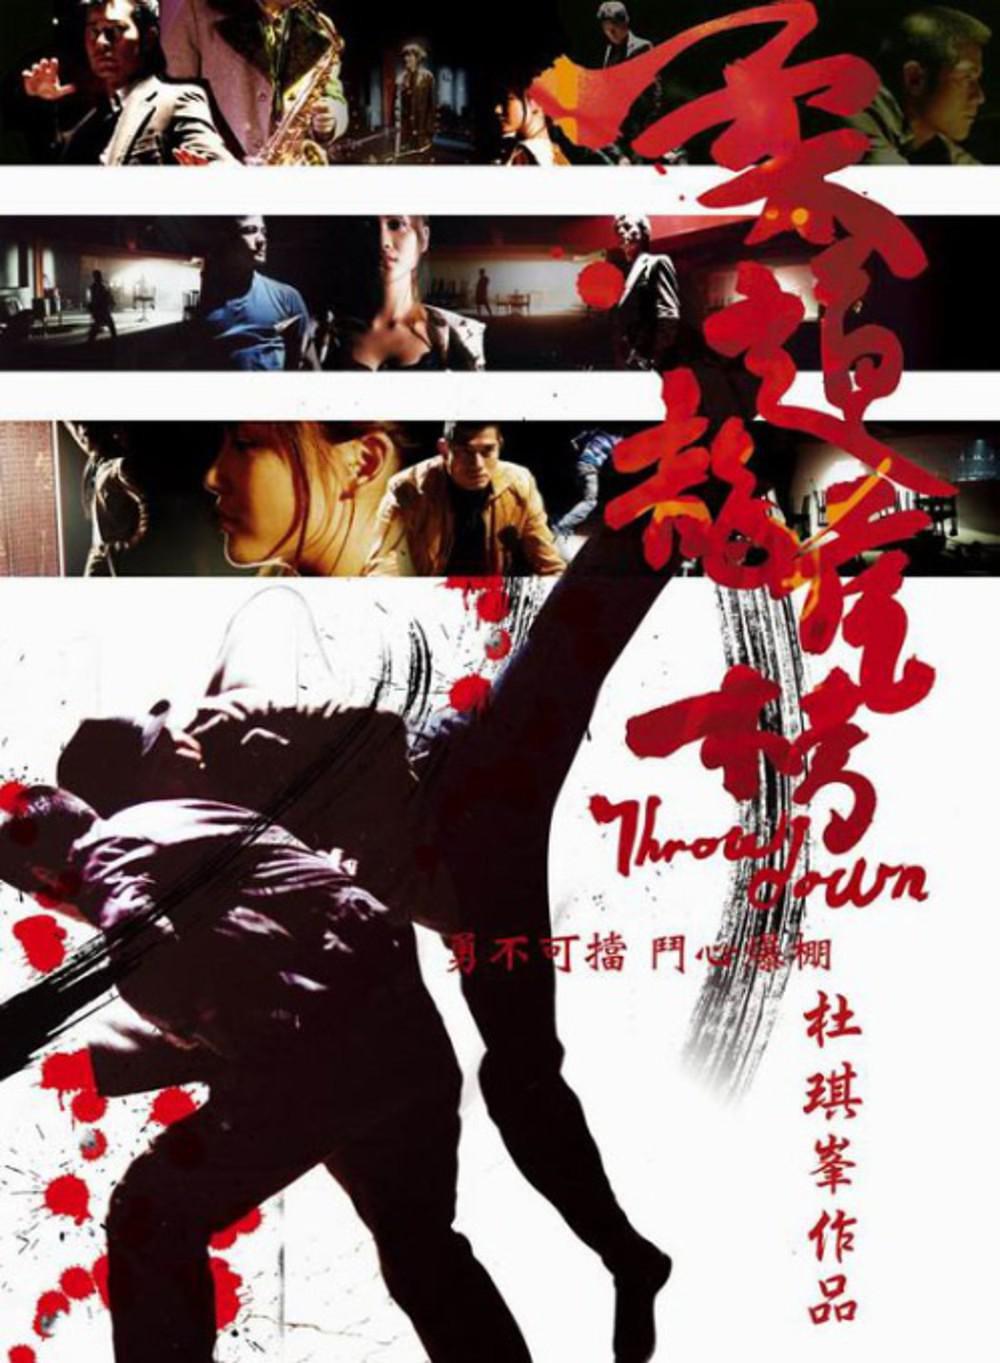  Throw.Down.2004.REMASTERED.CHINESE.1080p.BluRay.x264.DTS-FGT 8.69GB-1.png